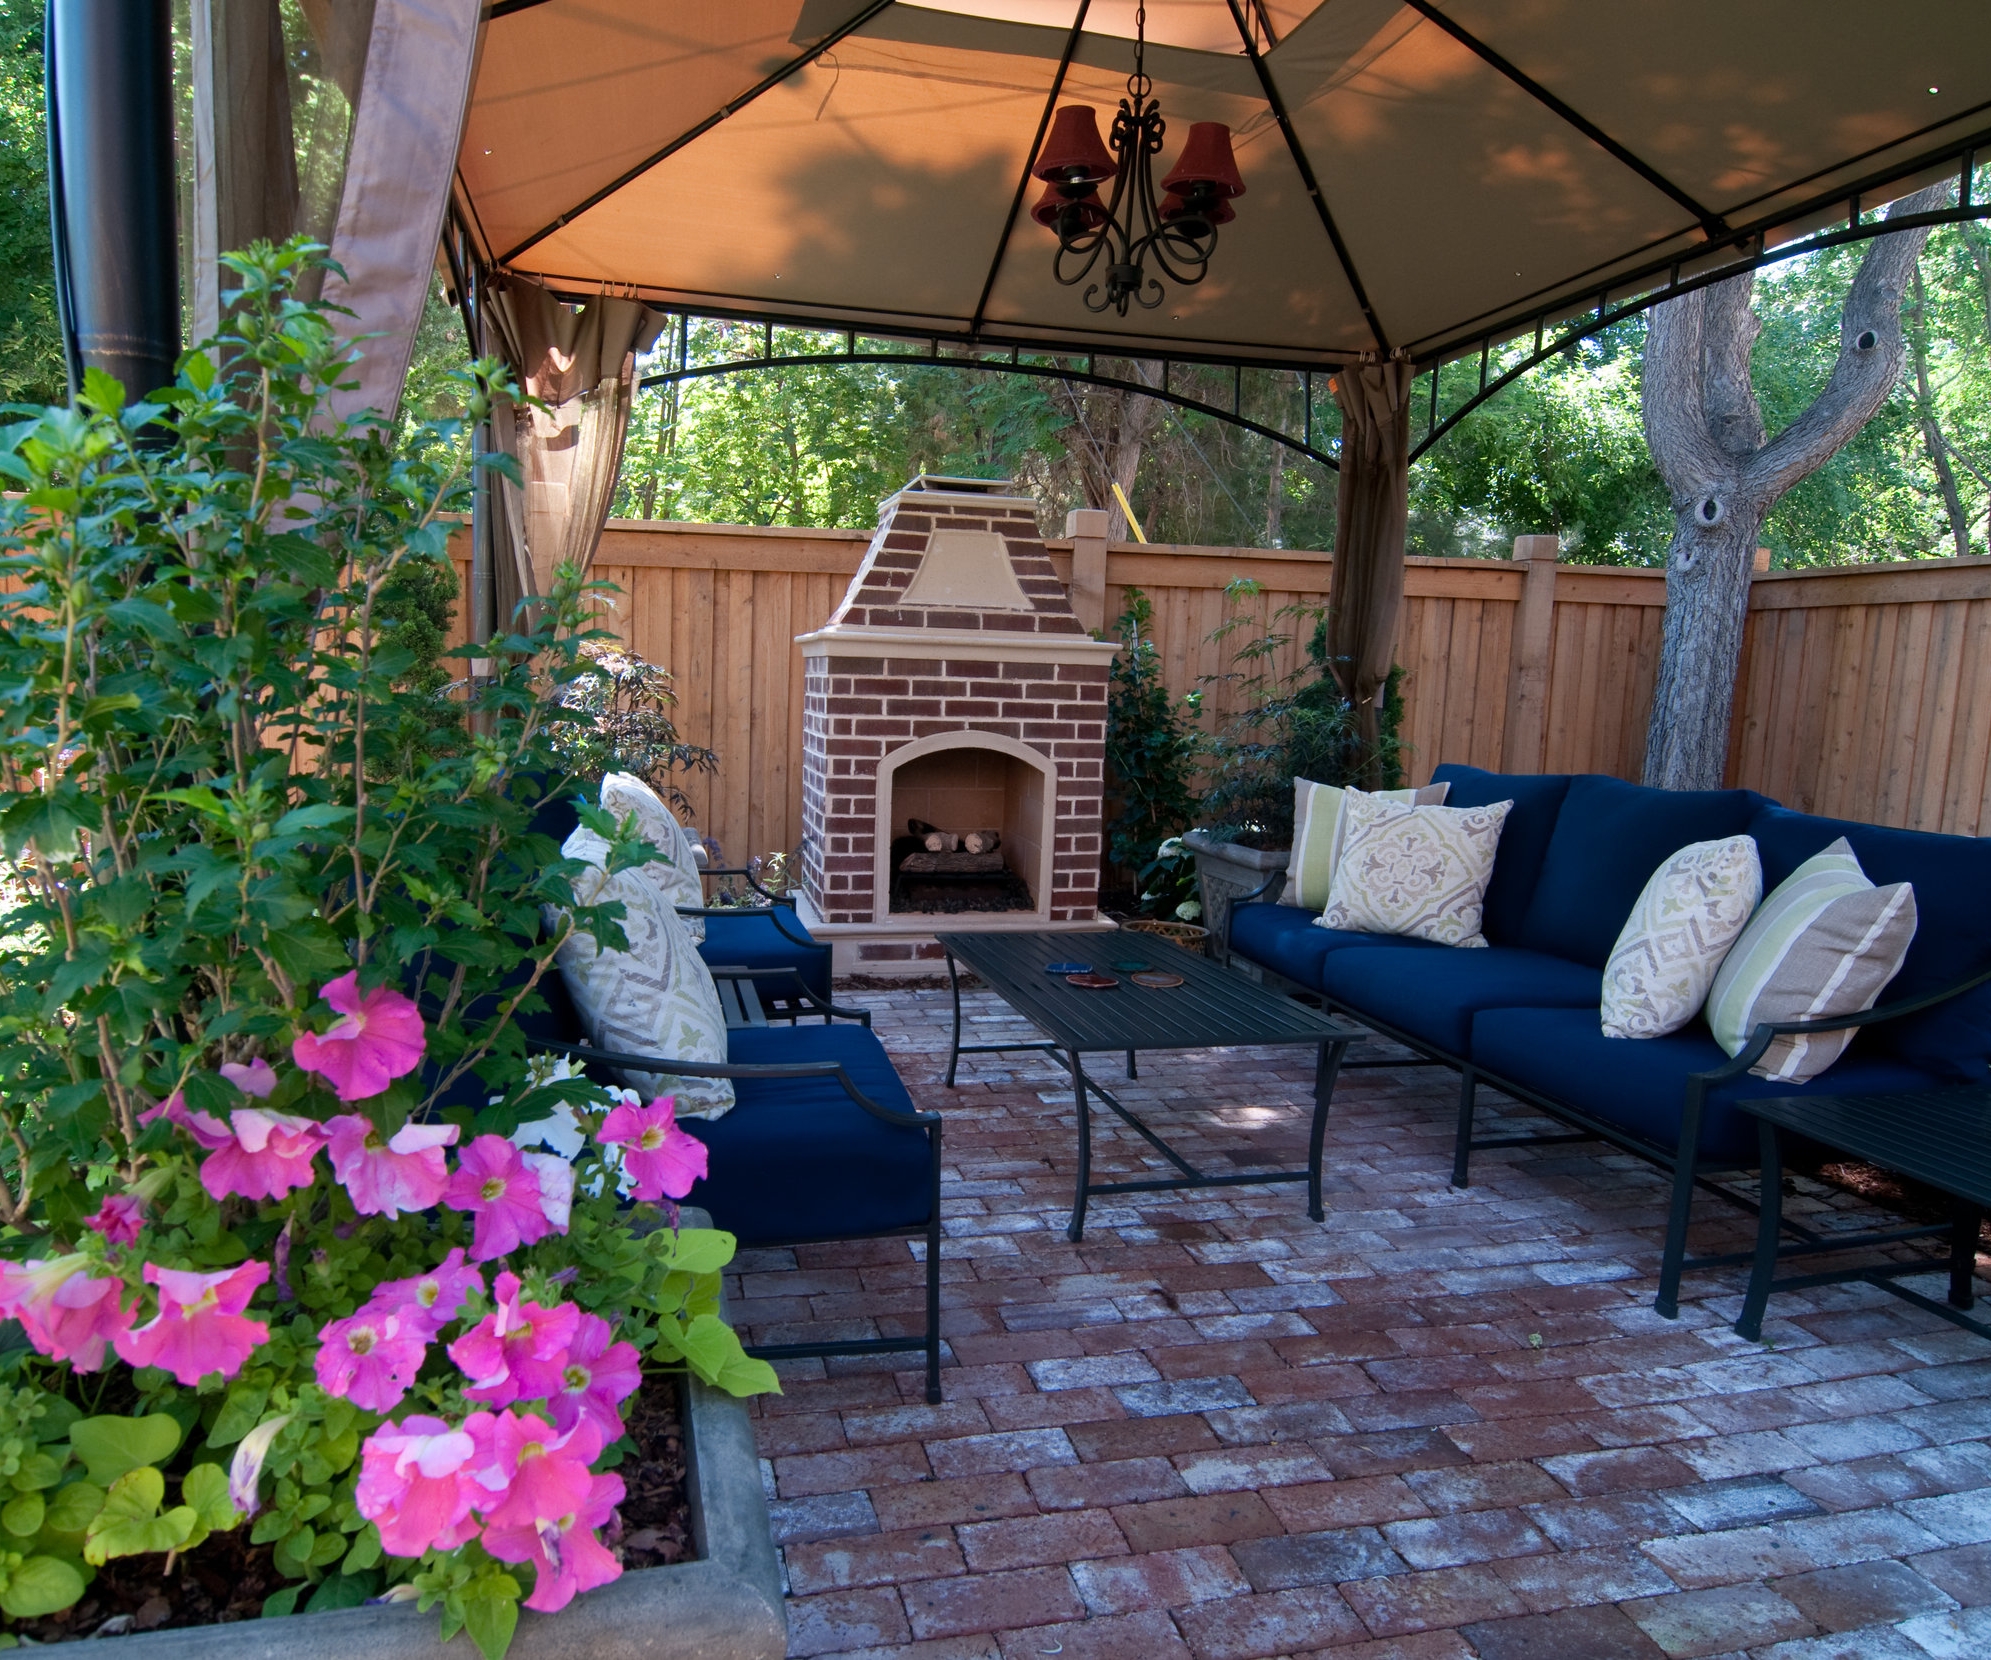 An outdoor room with permeable paving complete with outdoor gas fireplace and chandelier is fit for an English king!